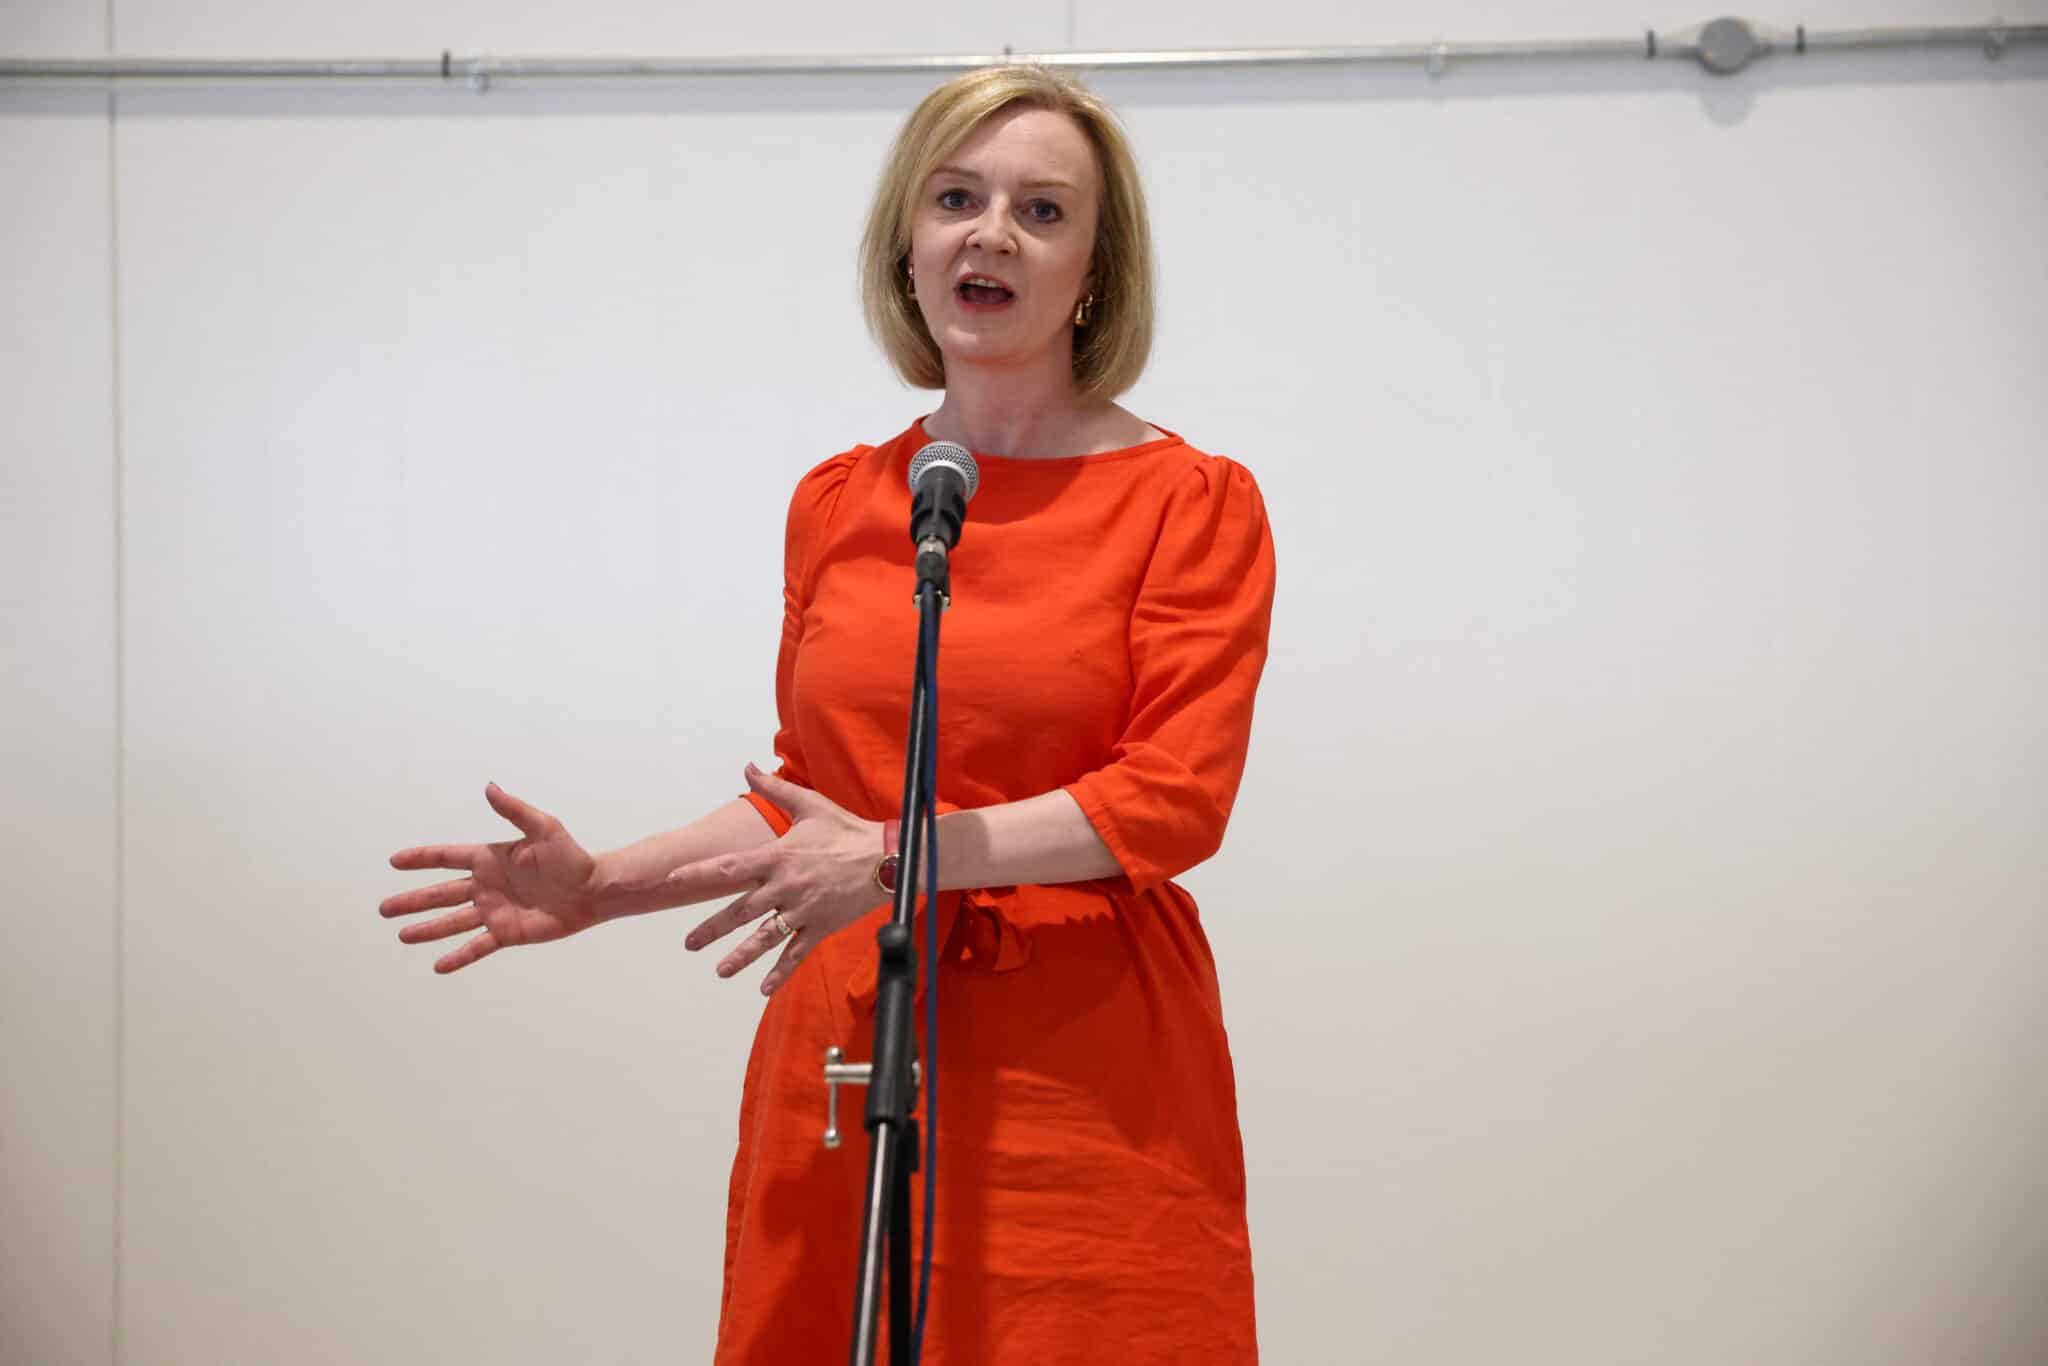 Liz Truss wearing an orange dress and speaking into a microphone.